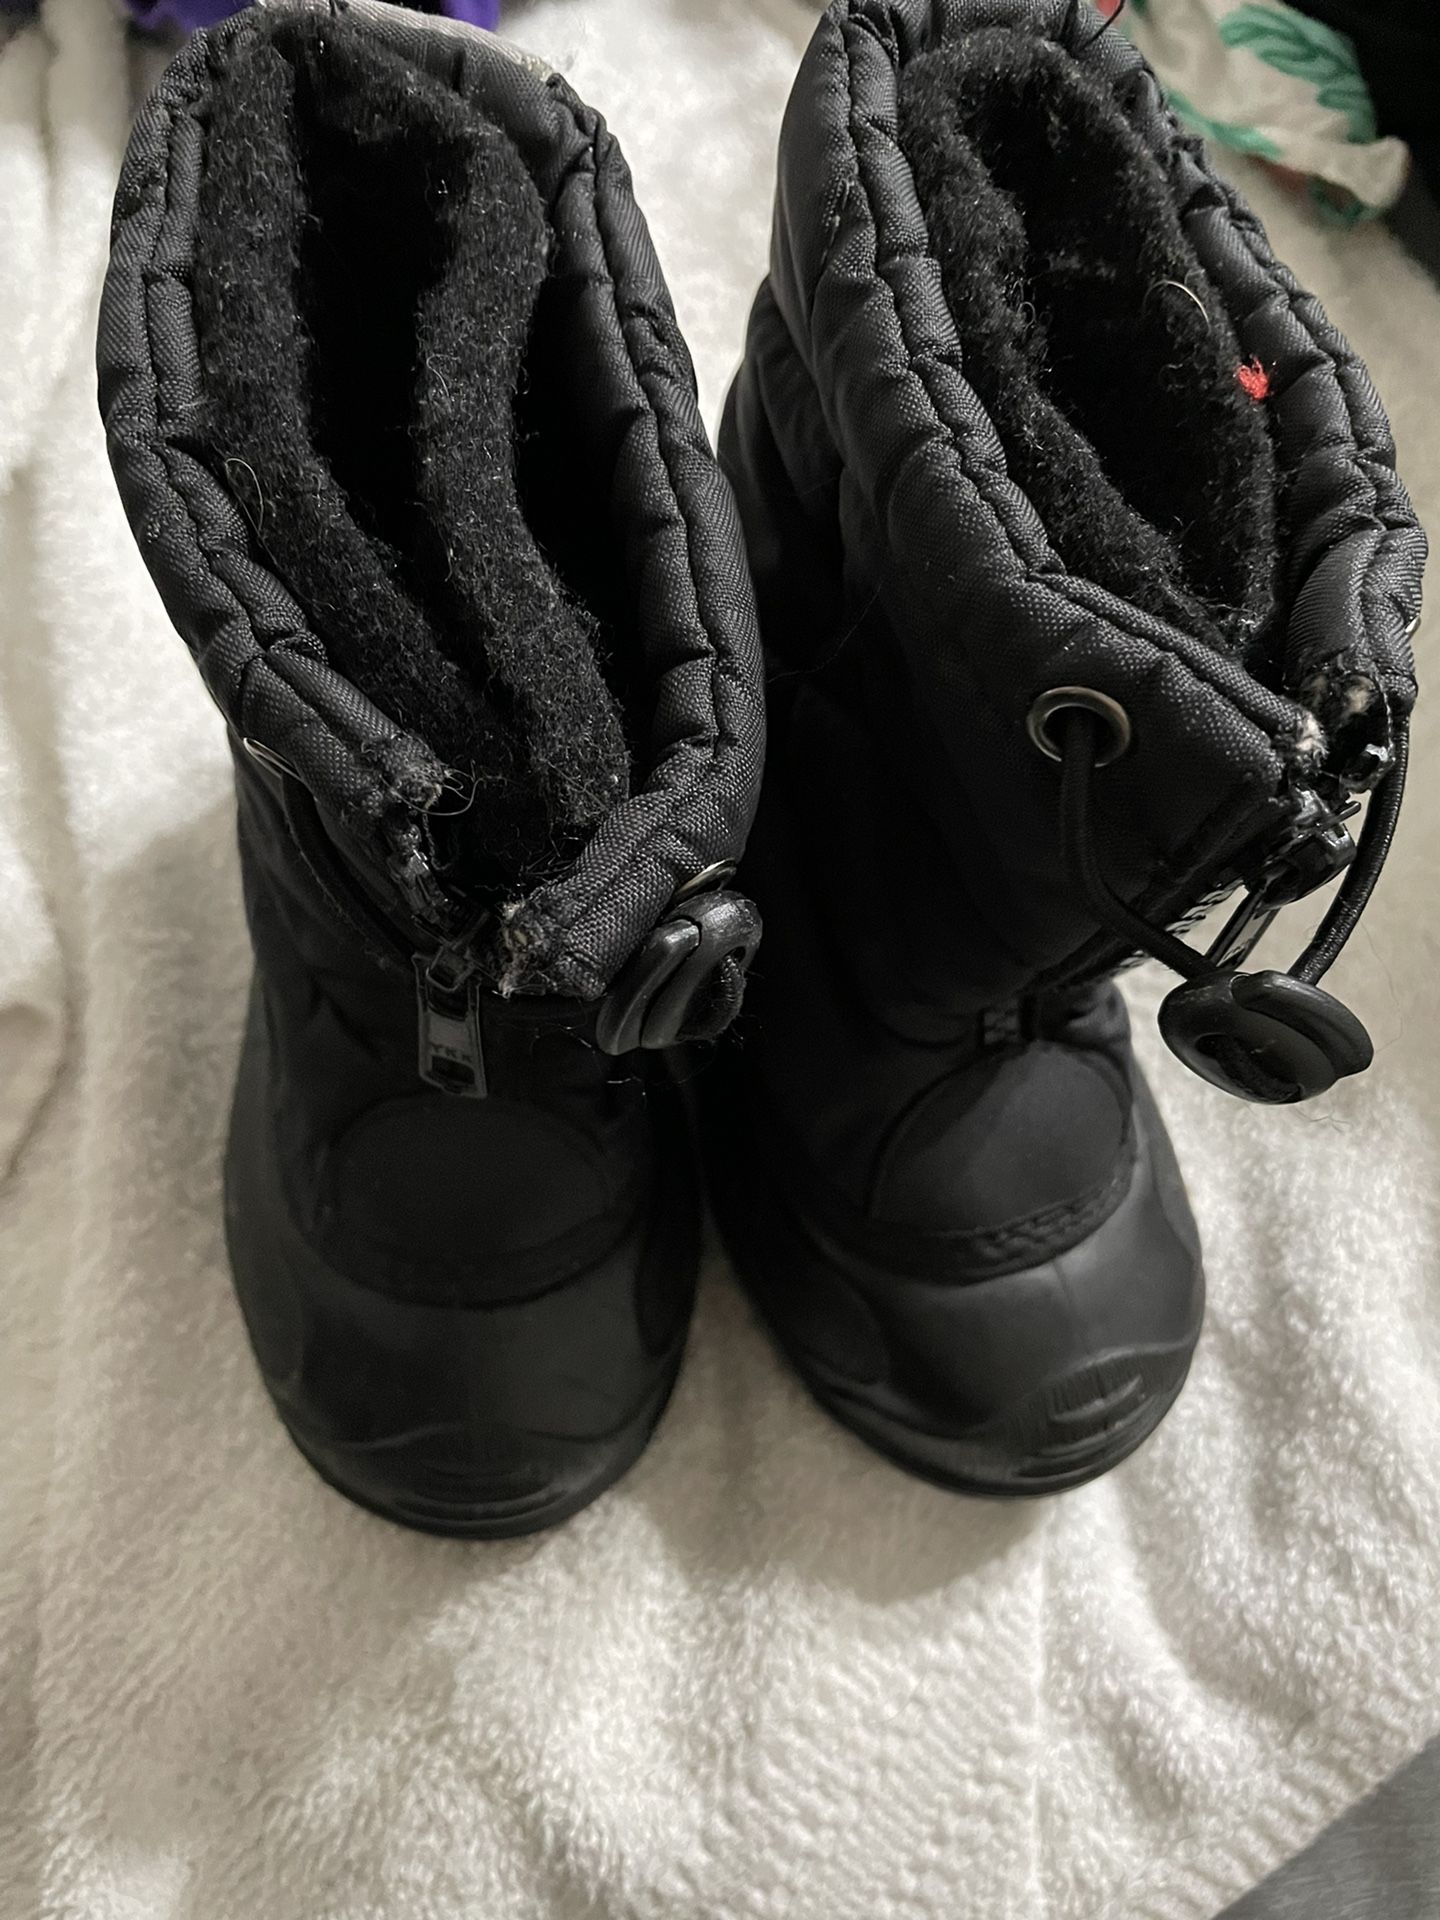 Snow Boots Toddler Size 6